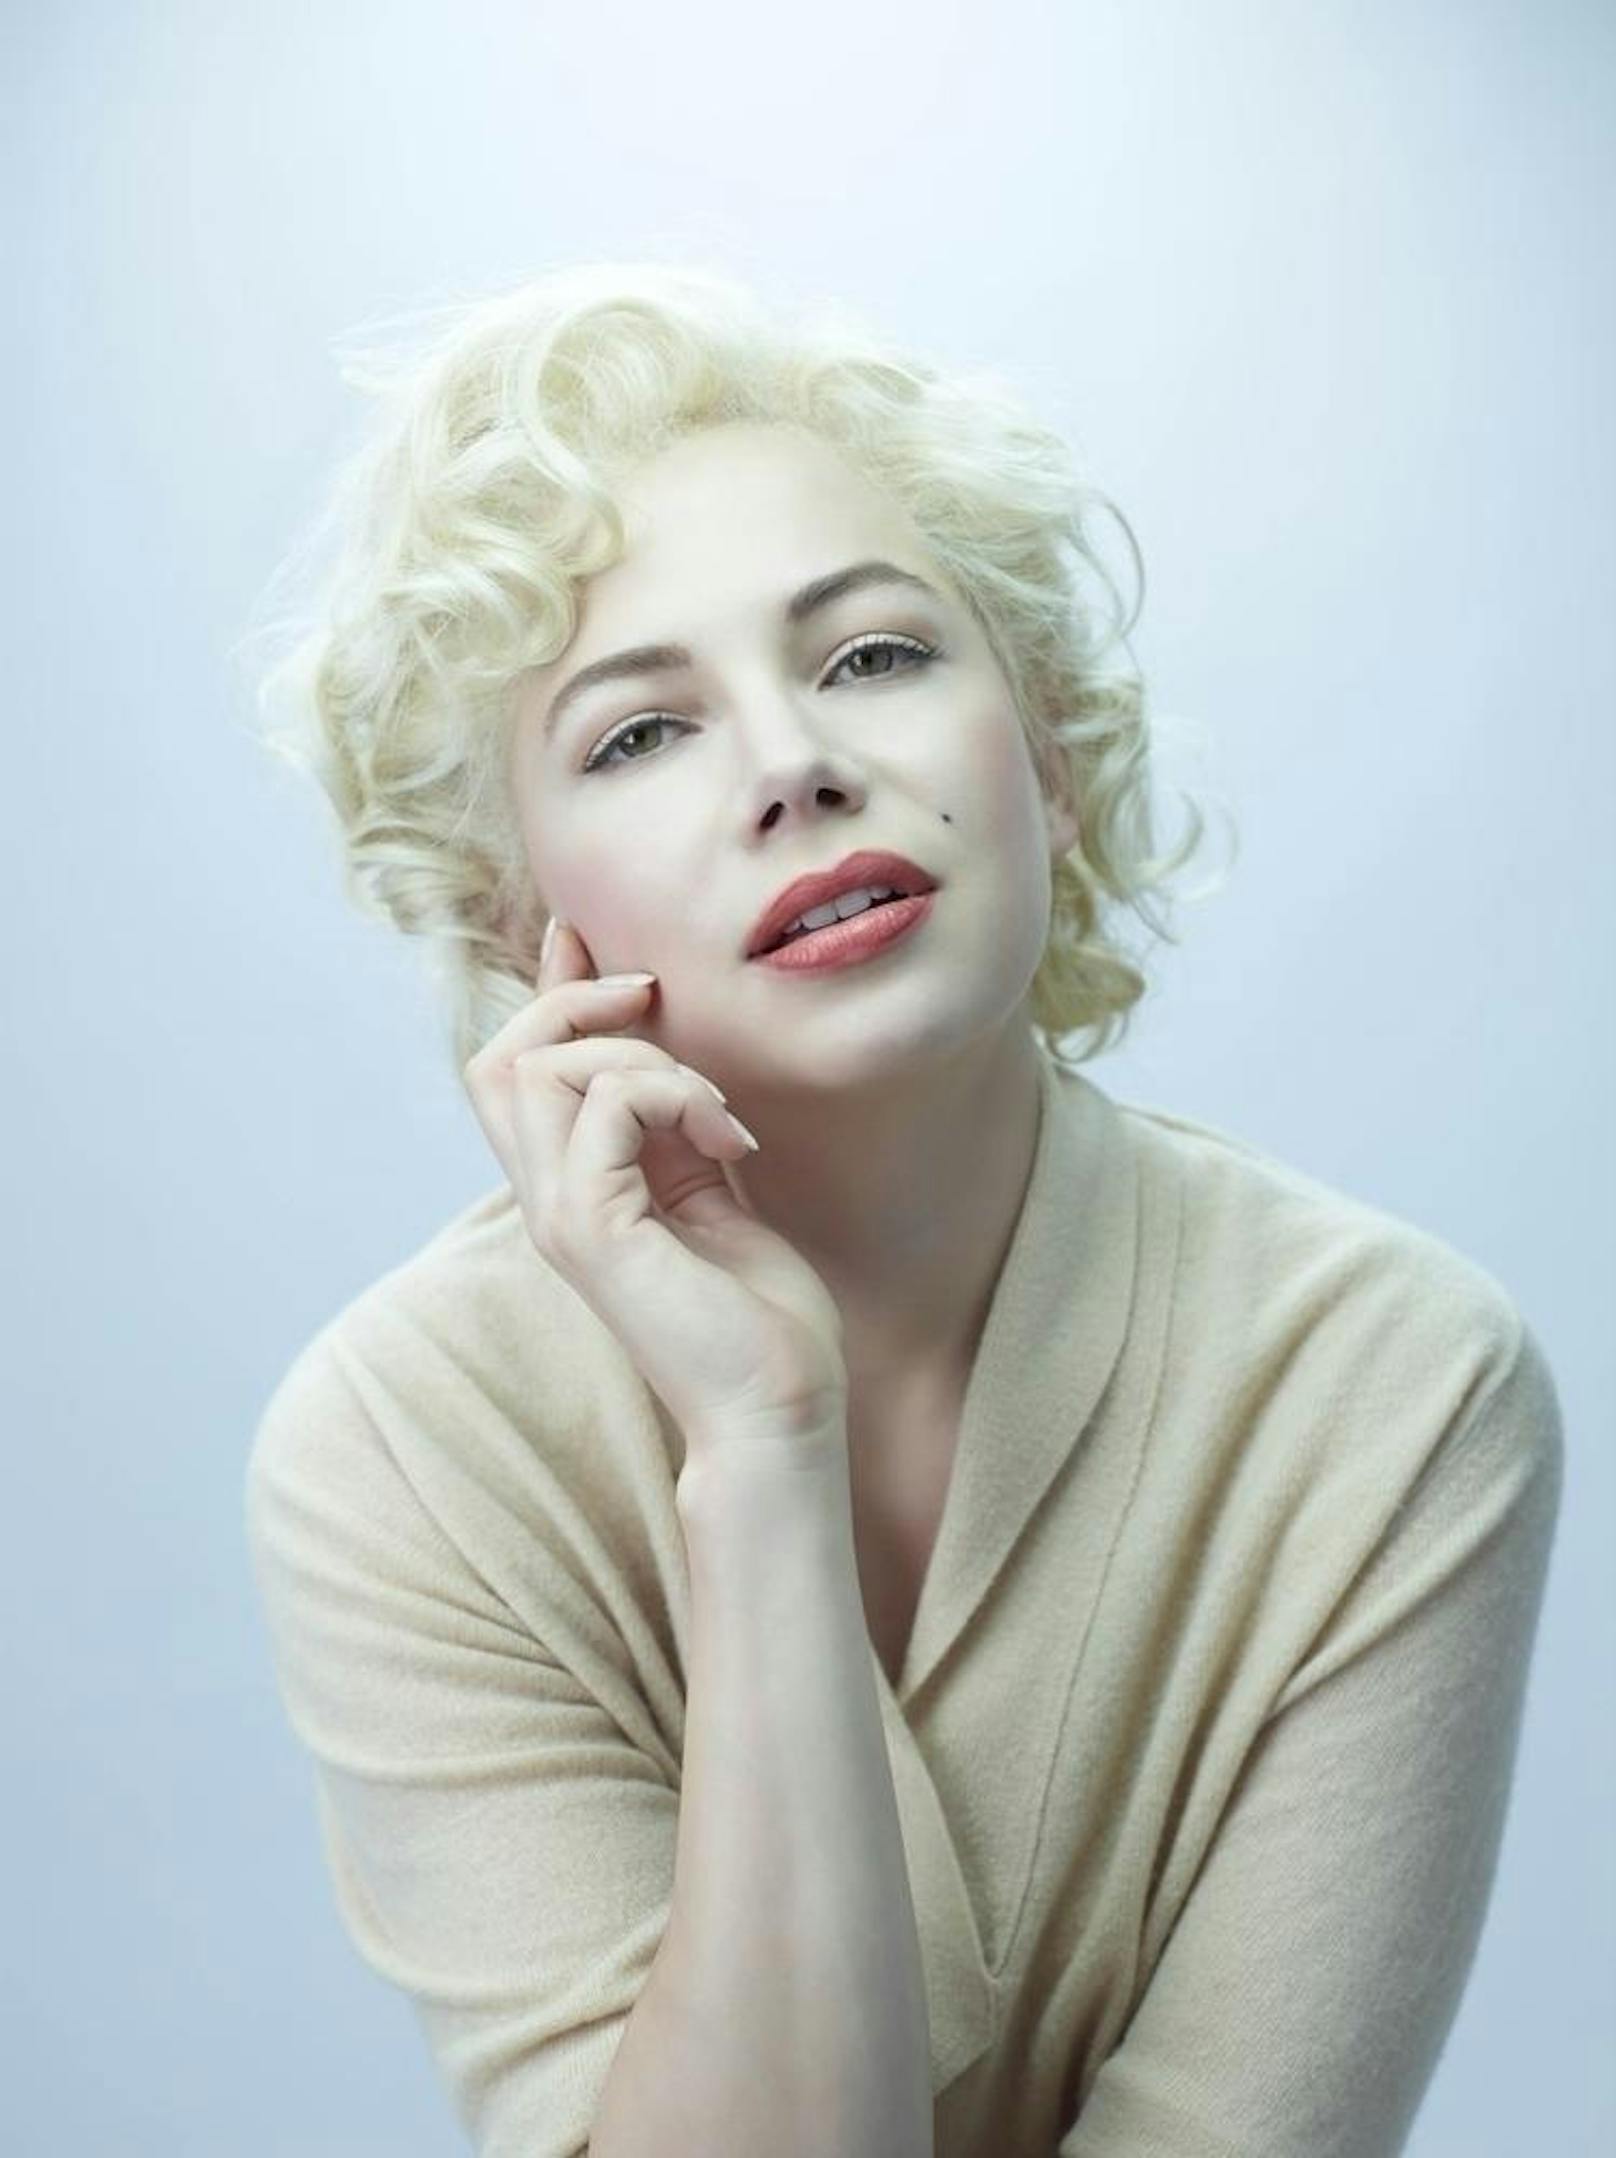 Michelle Williams in "My Week with Marilyn"